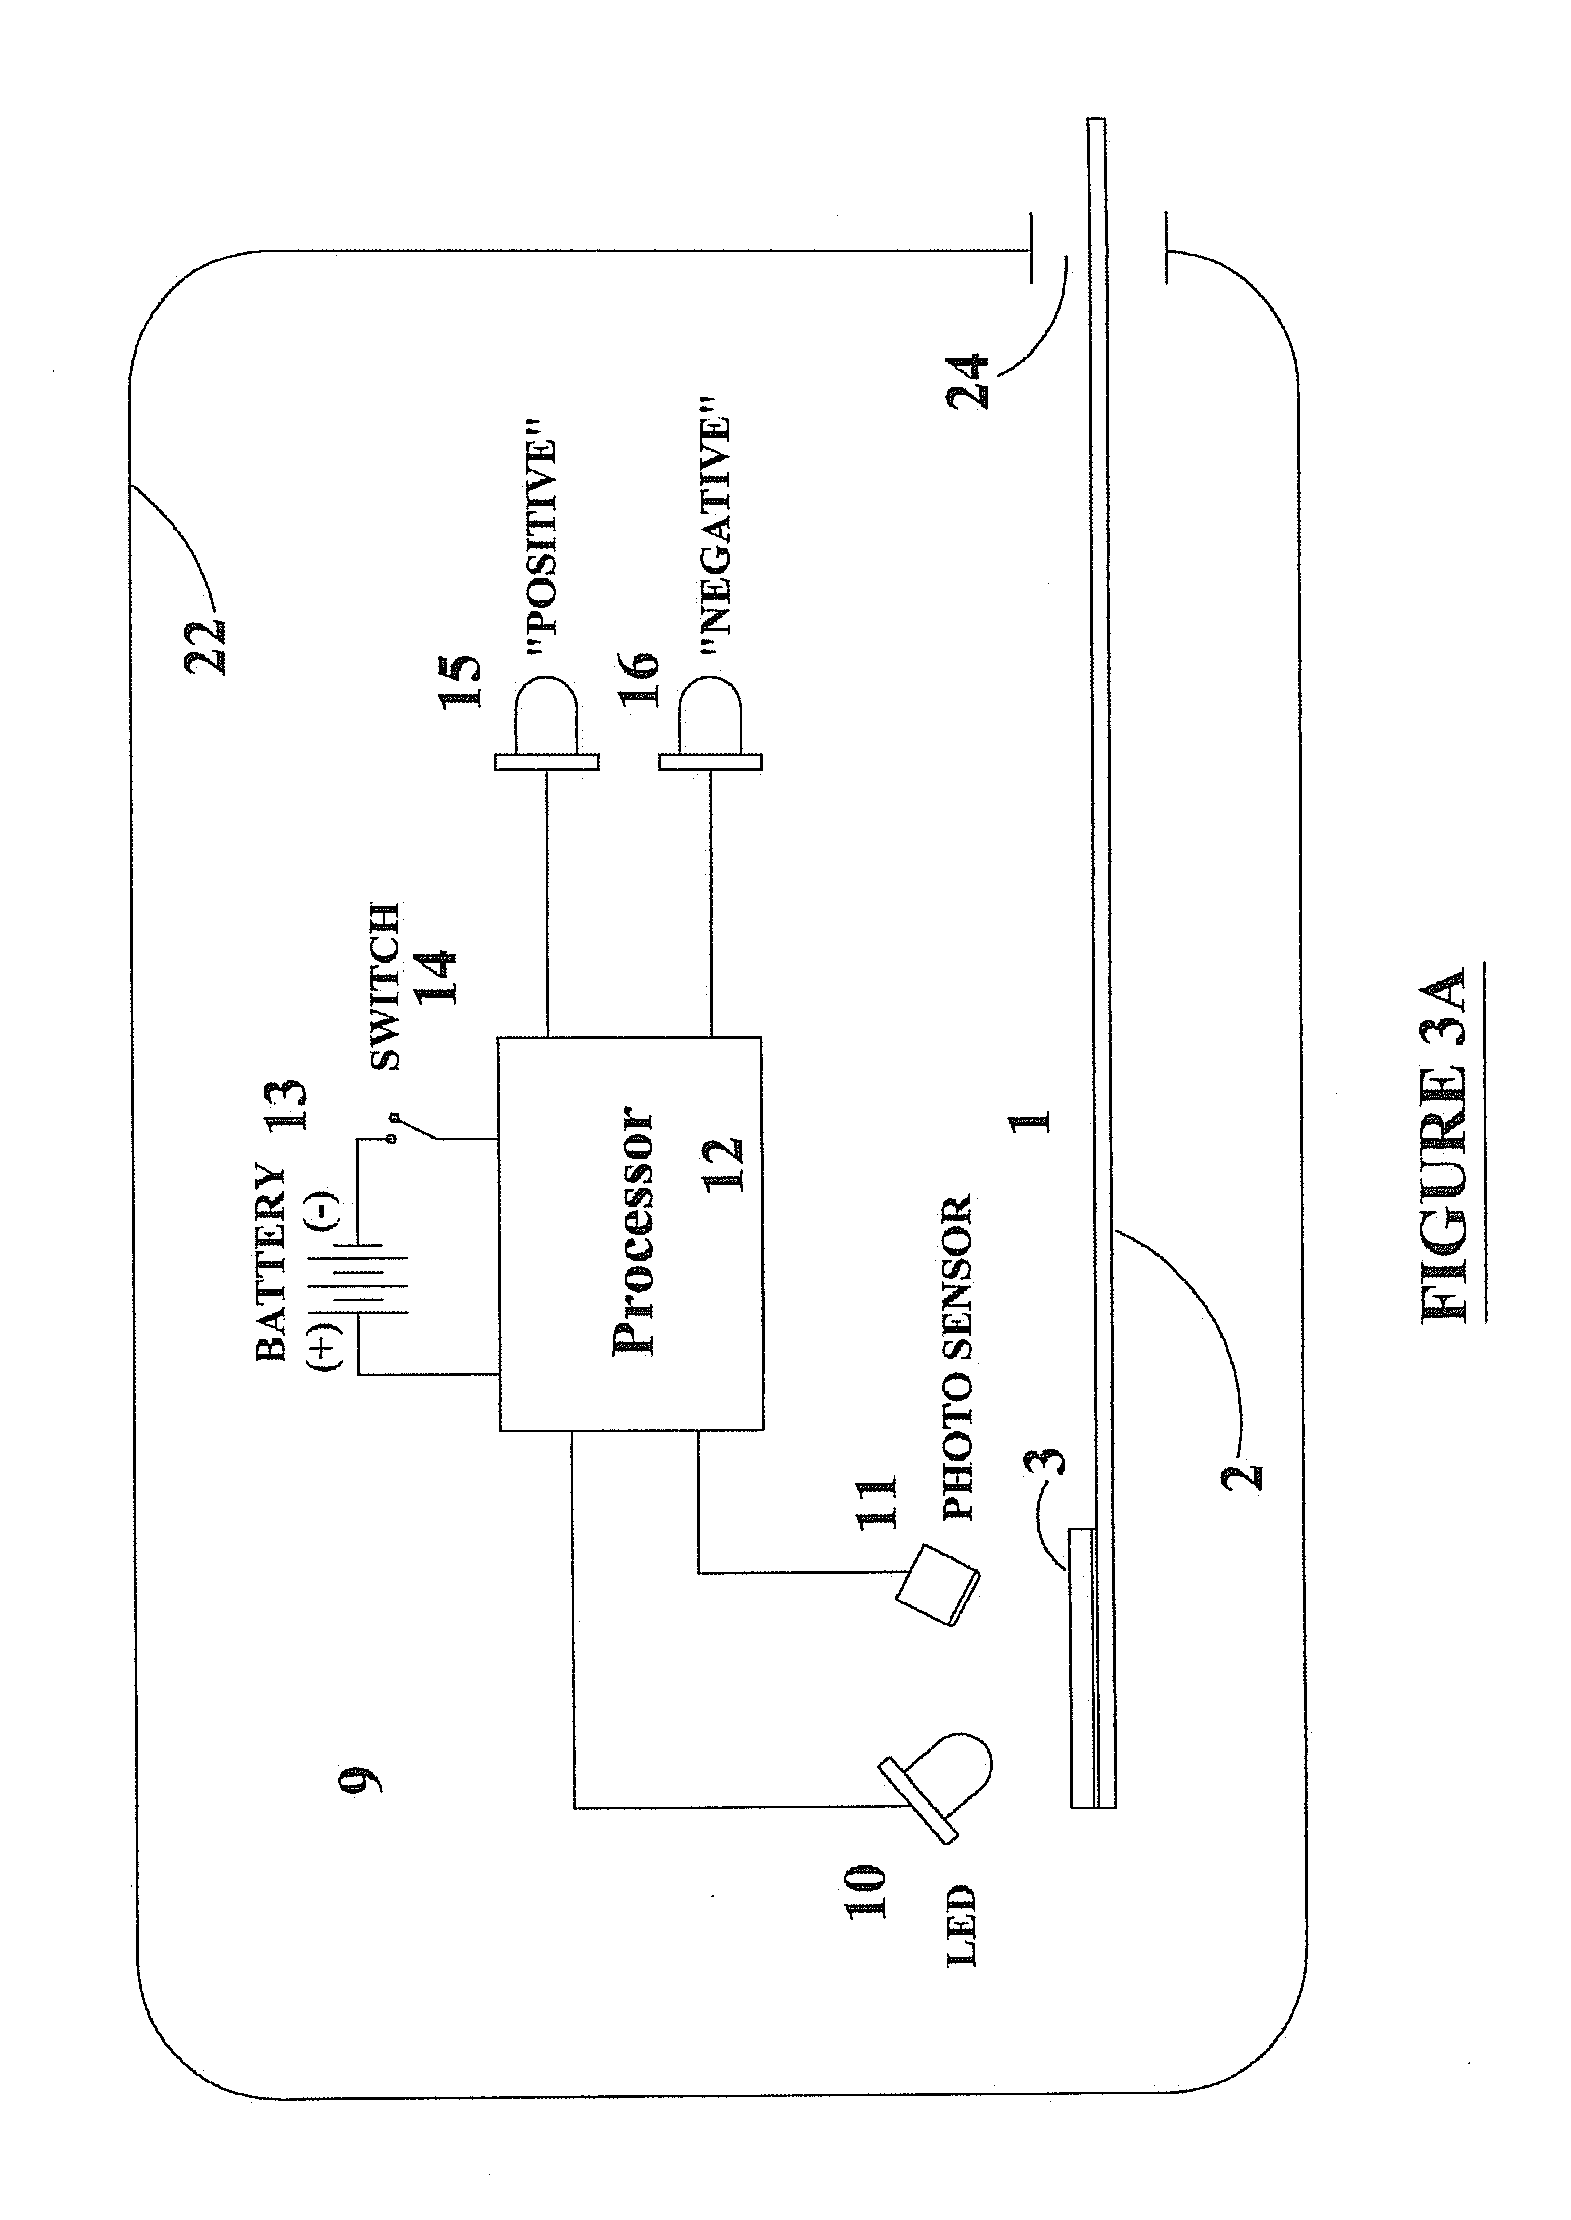 Method to detect hemolytic streptococcus and optoelectrically determine results